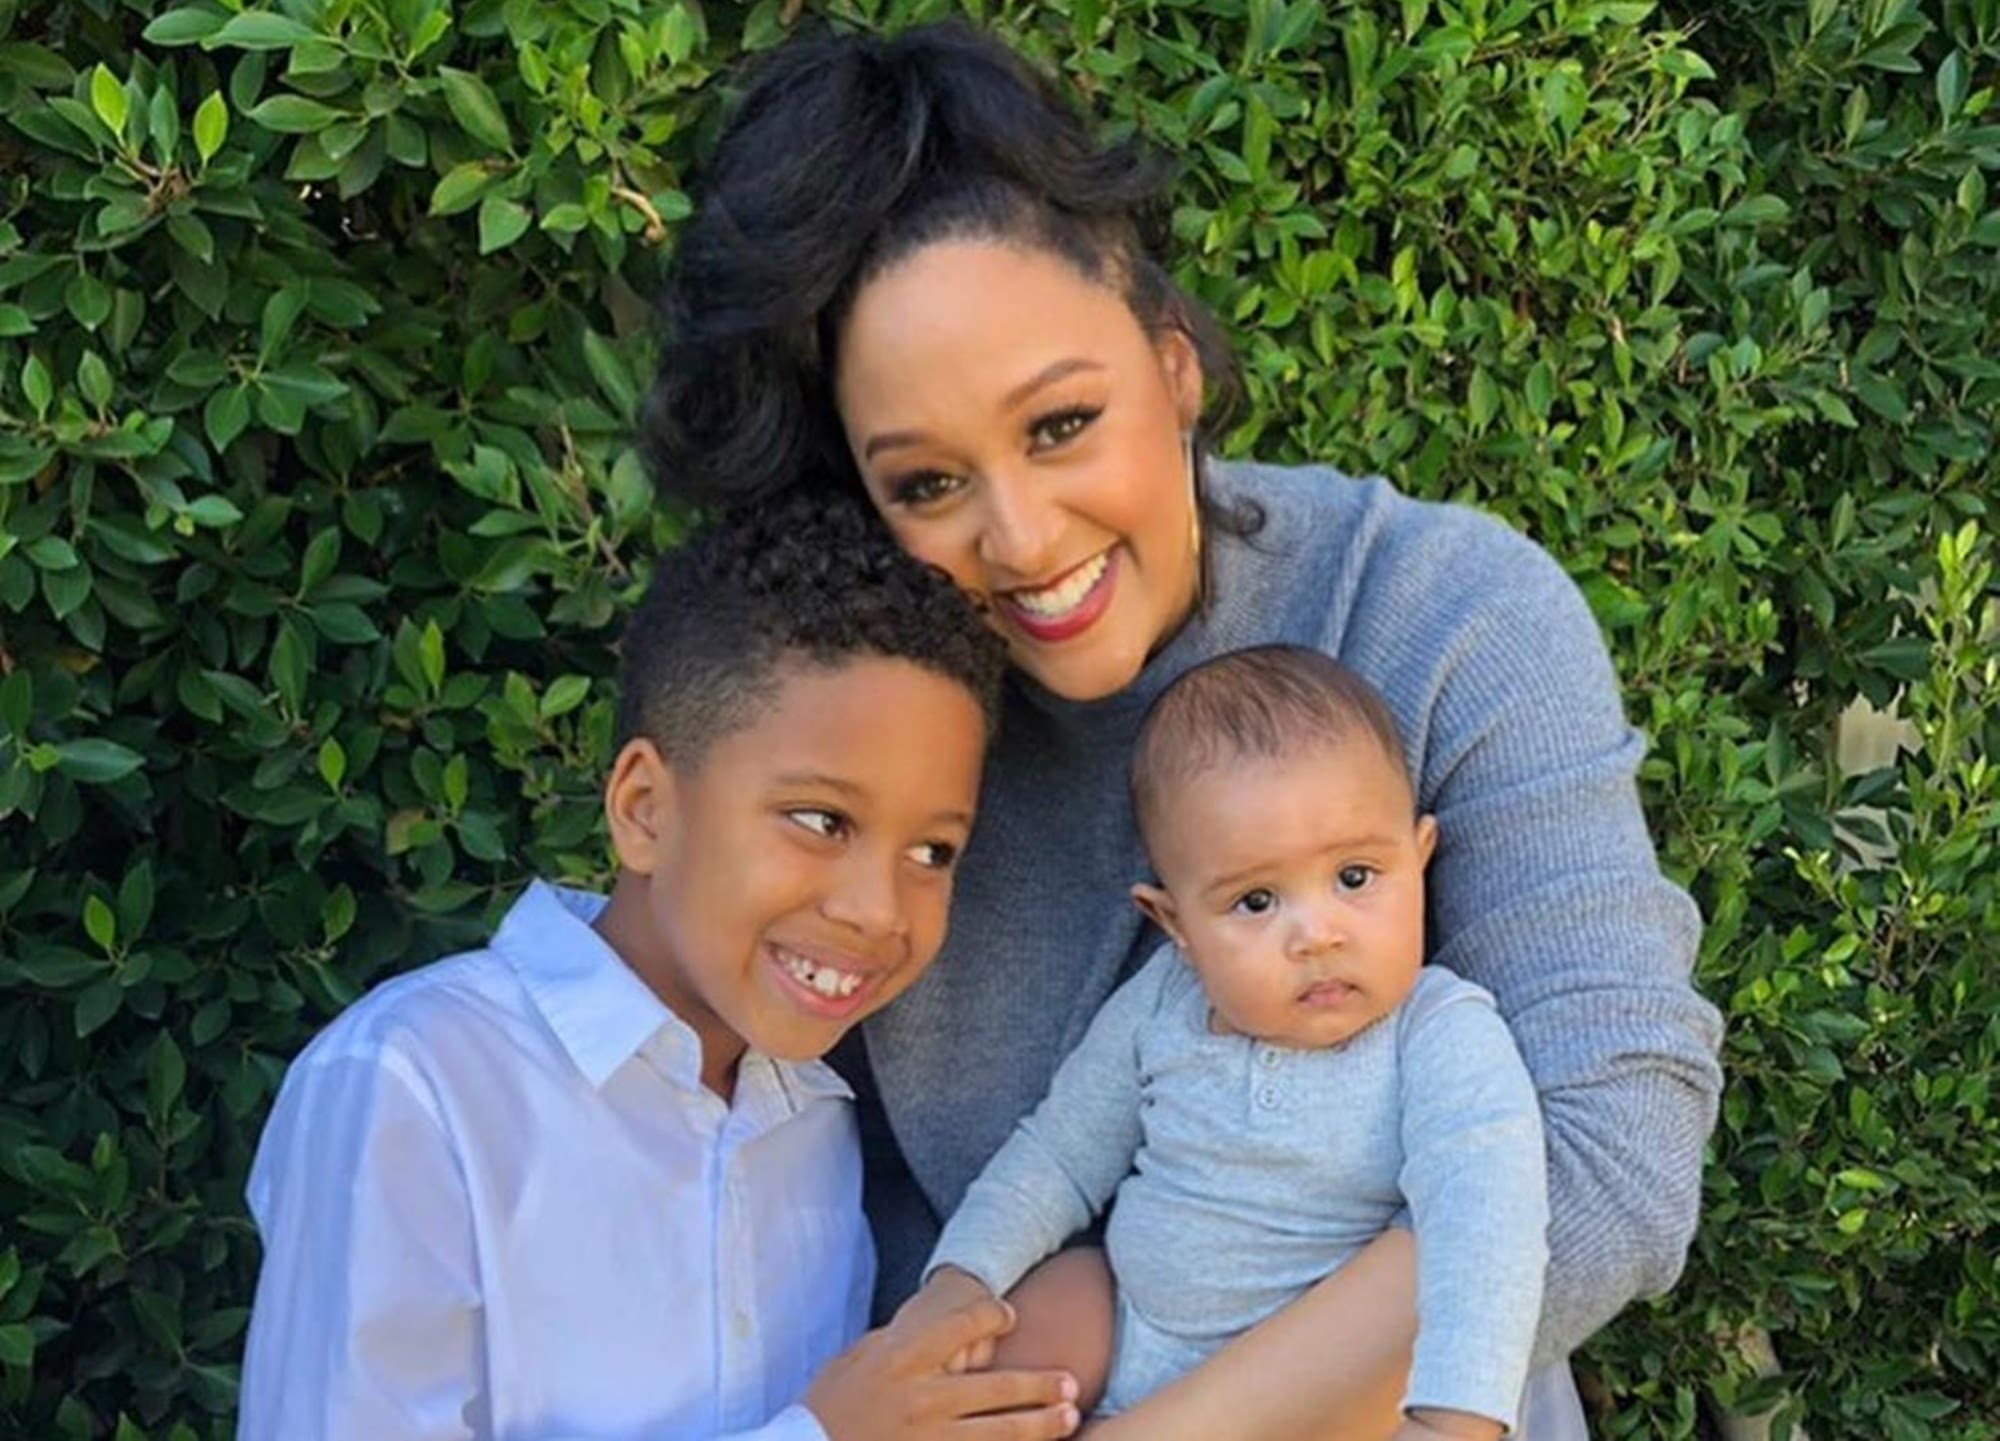 Tia Mowry recently took to social media, where she posted a hilarious pictu...